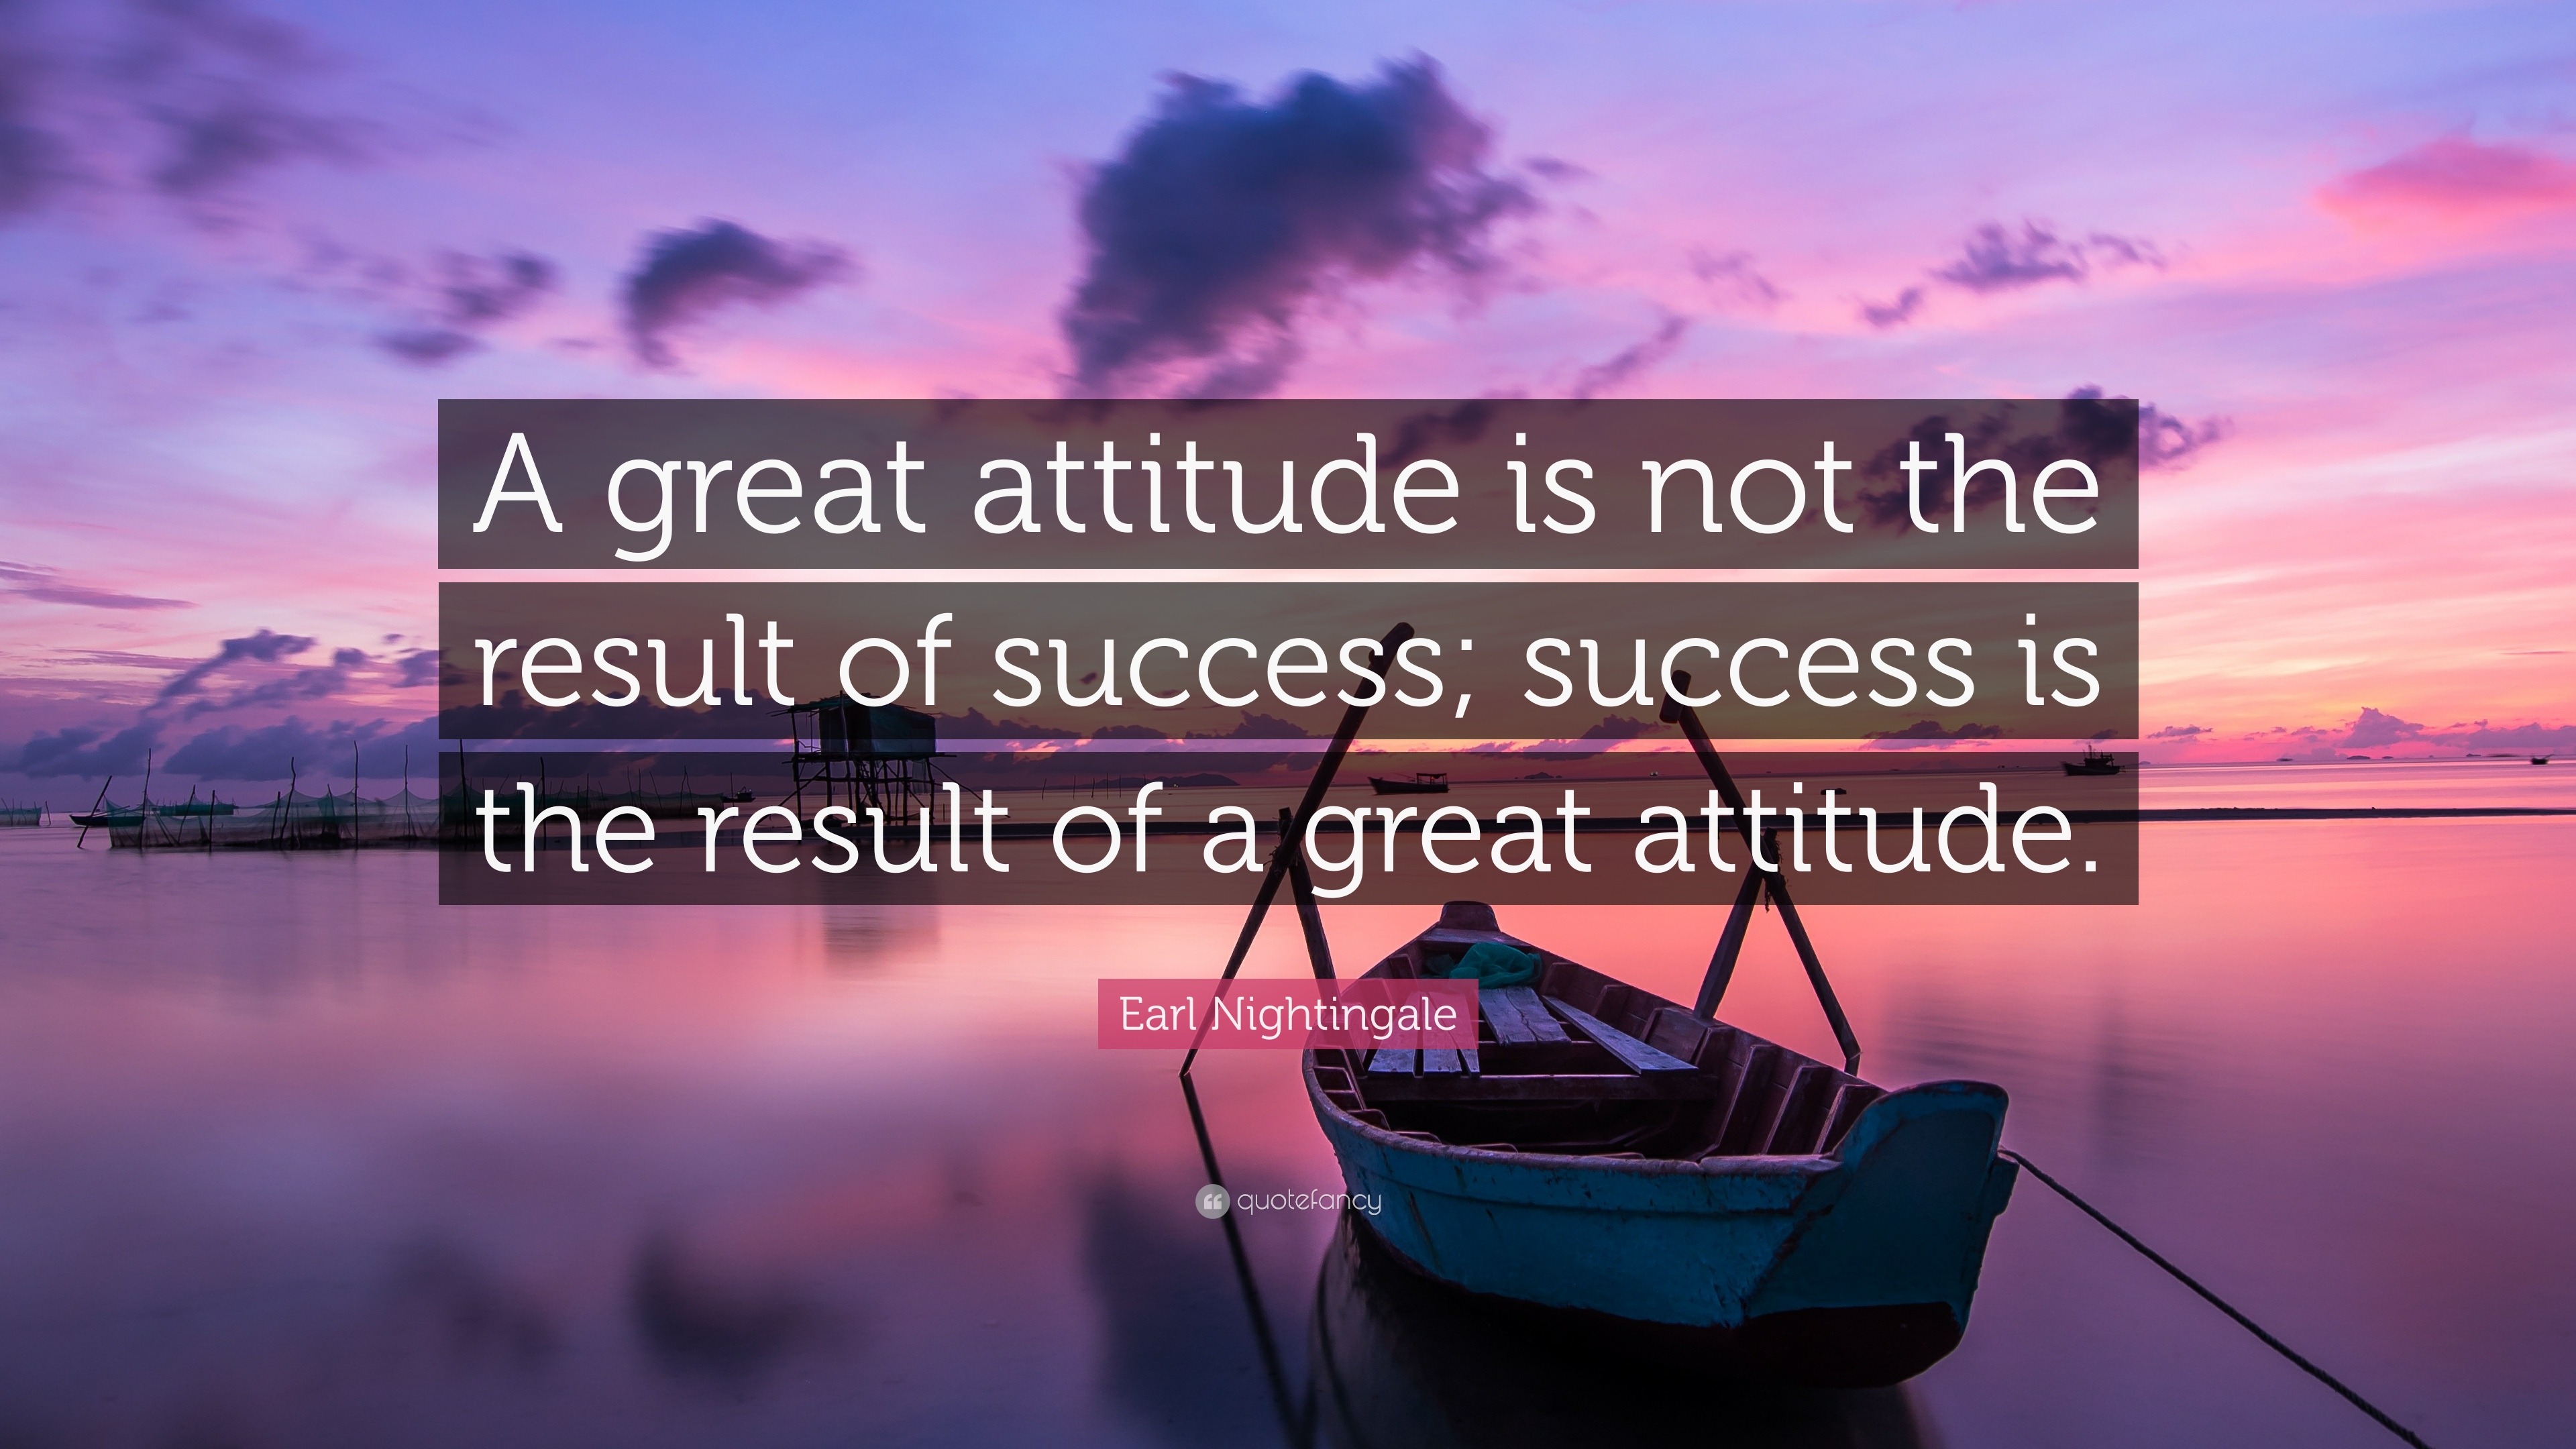 Earl Nightingale Quote “a Great Attitude Is Not The Result Of Success